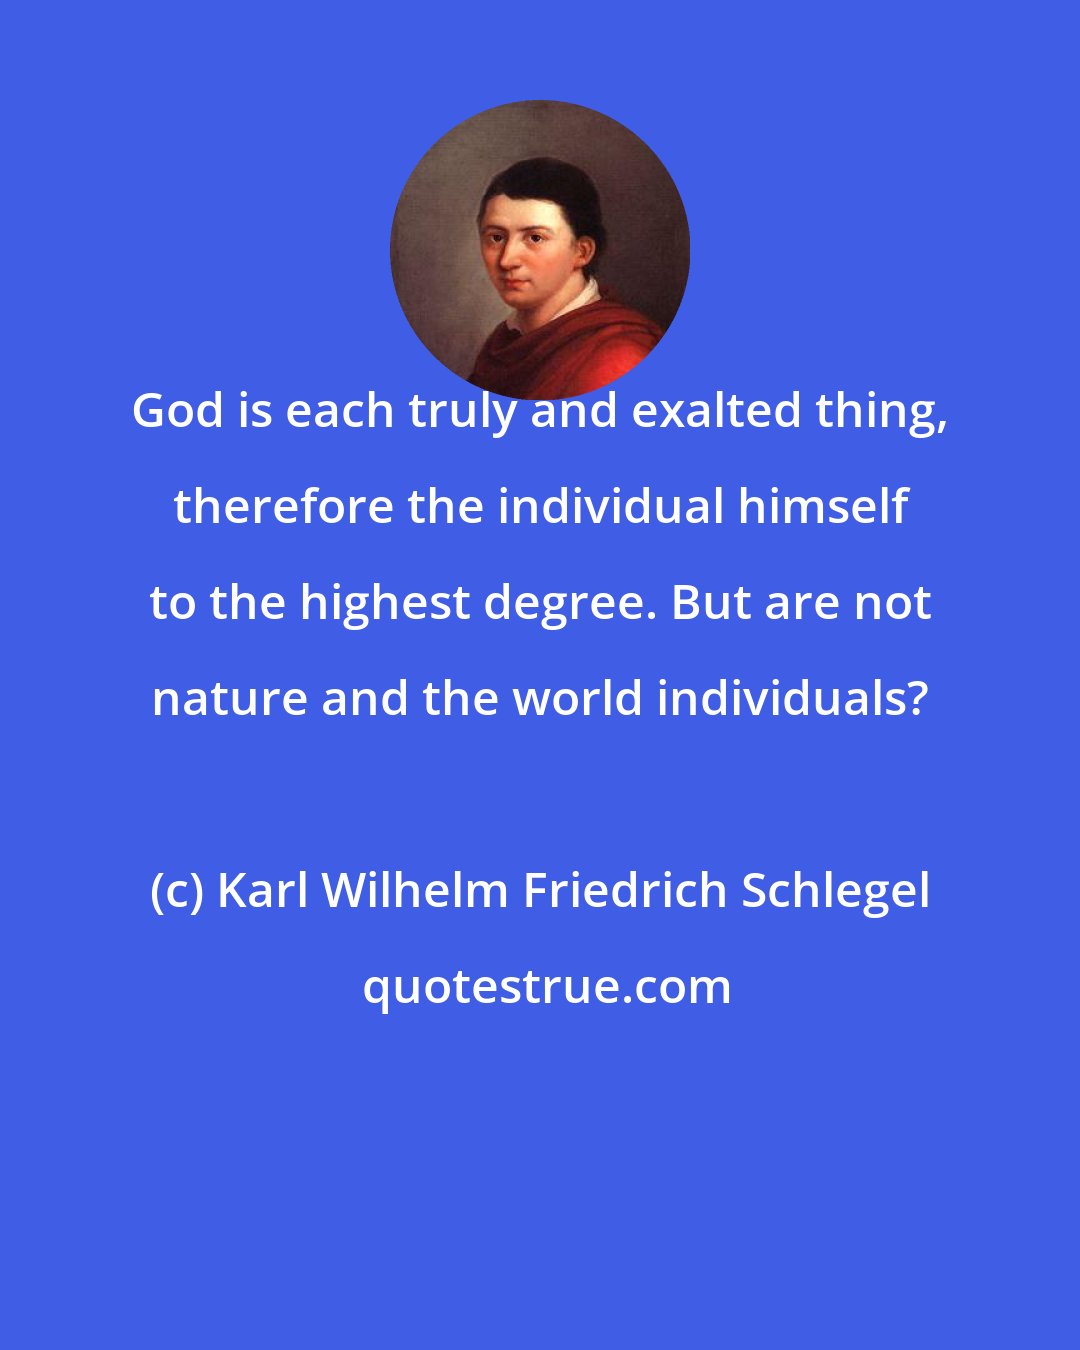 Karl Wilhelm Friedrich Schlegel: God is each truly and exalted thing, therefore the individual himself to the highest degree. But are not nature and the world individuals?